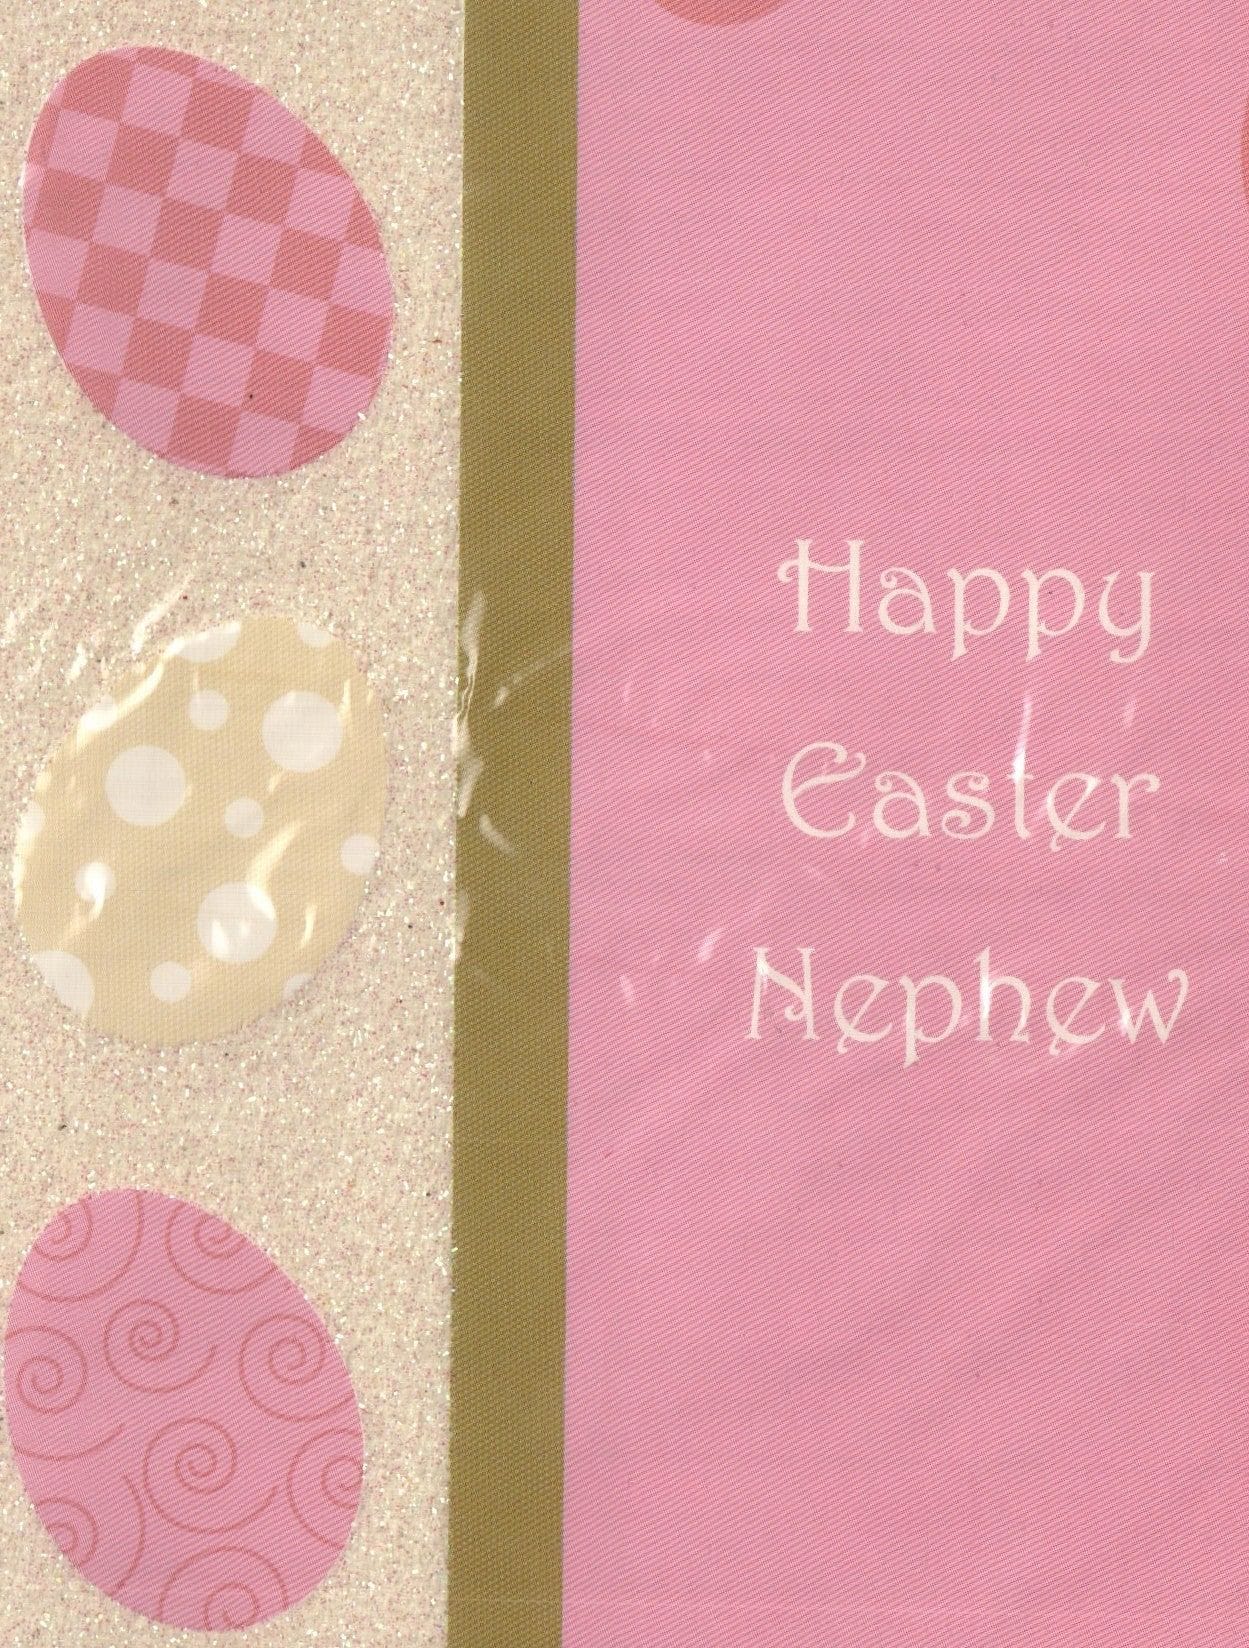 Happy Easter Nephew Easter Card - Shelburne Country Store